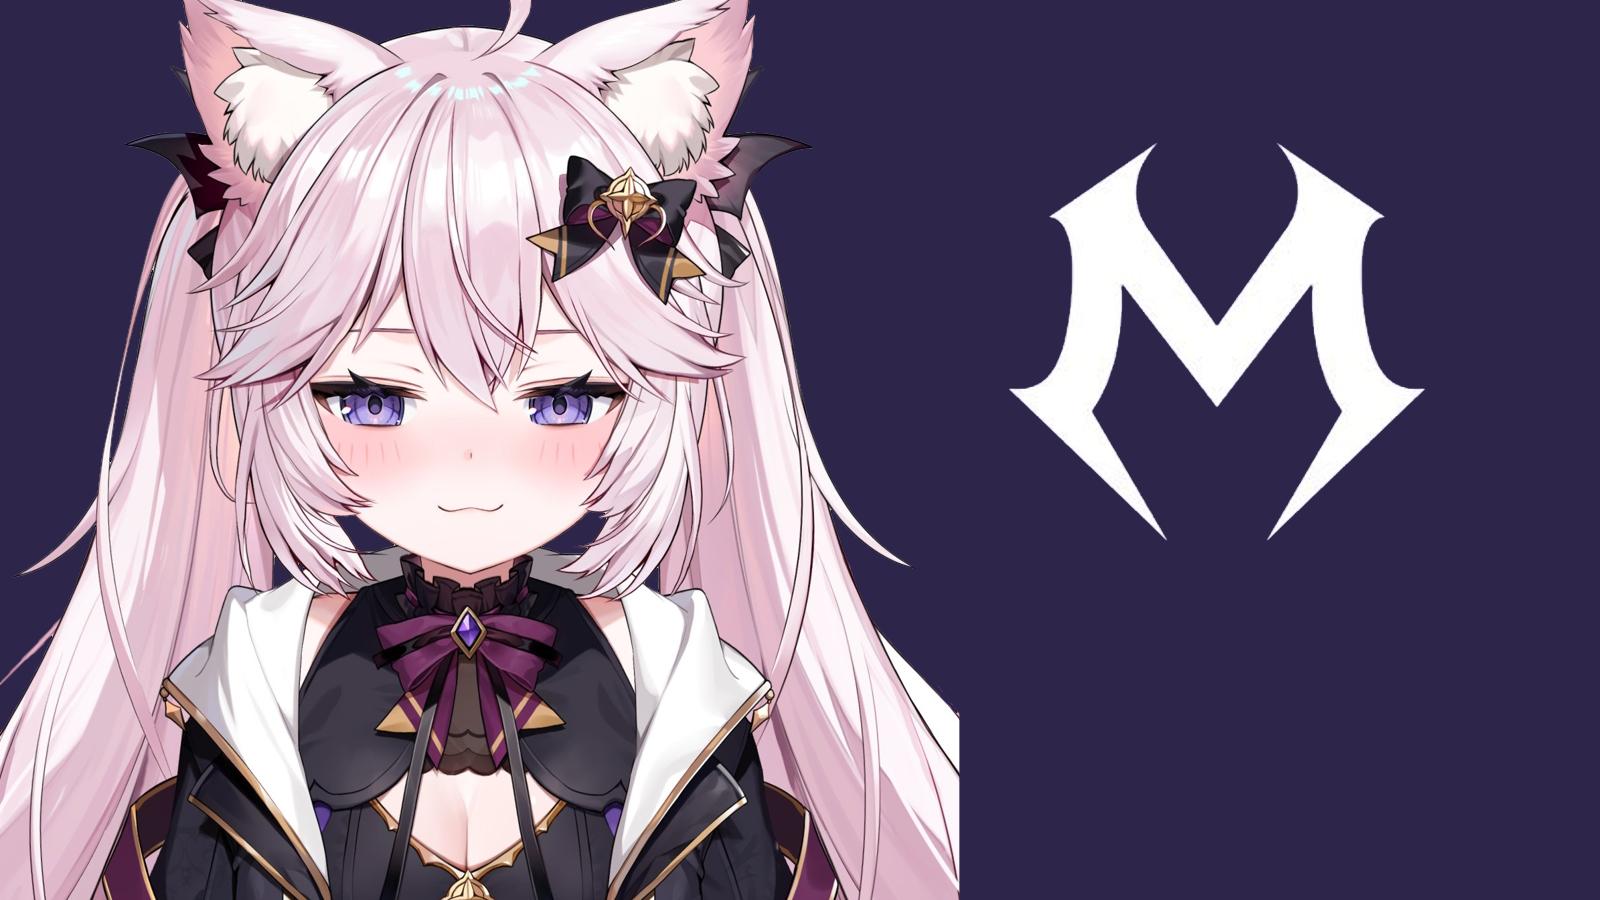 Nyanners vtuber model next to Mythic logo with company colors in background